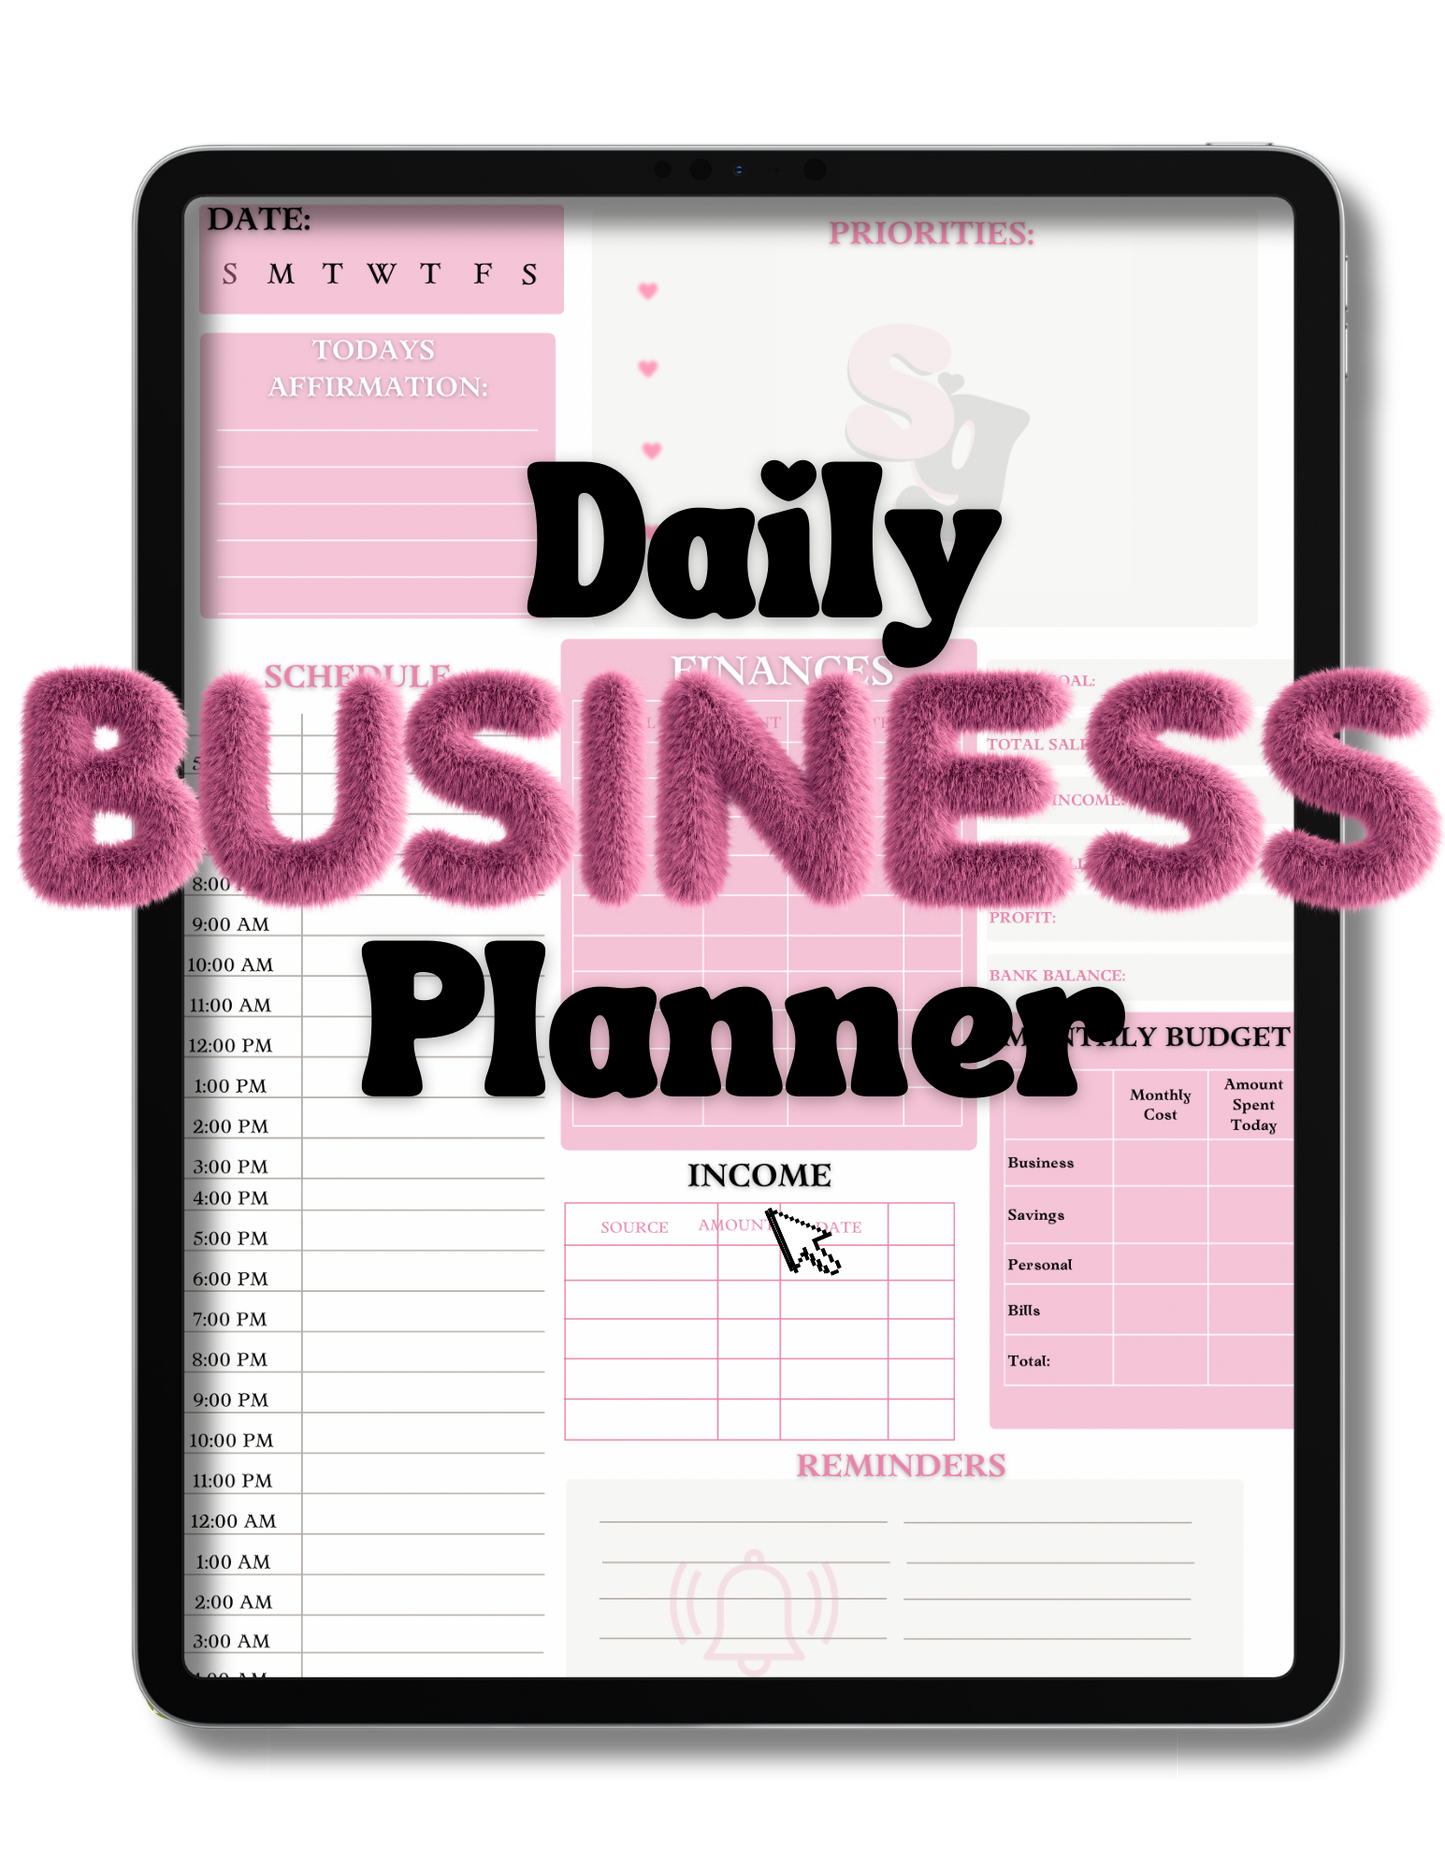 Daily Business Planner